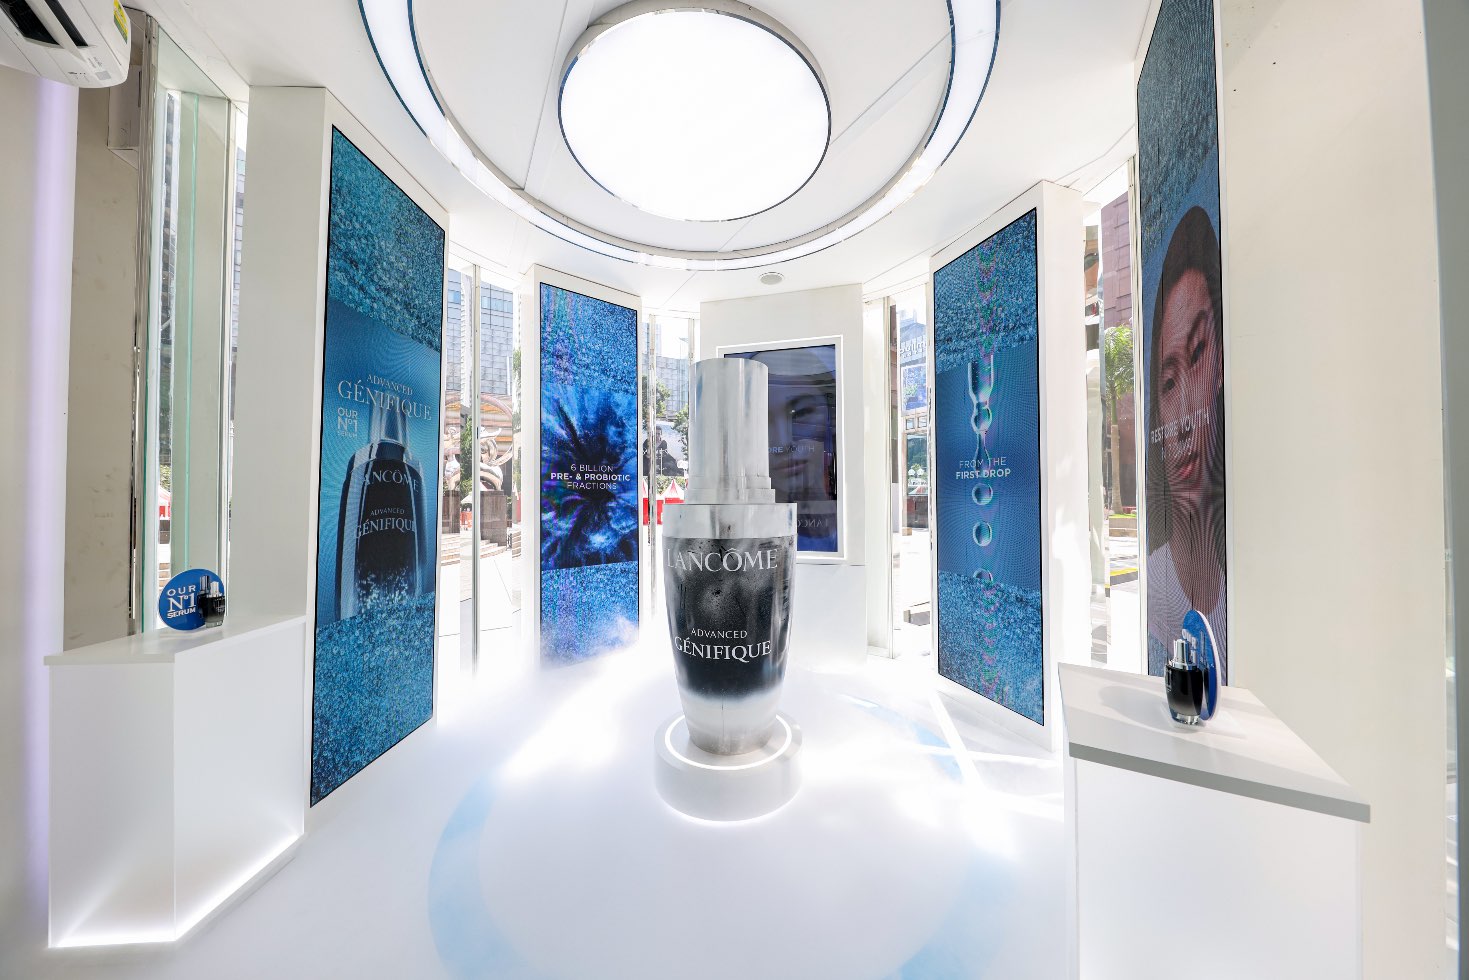 , Visit Lancome Advanced Genifique Skin Repair Lab – it’s ‘Bloodhounds’ actor Woo Do-Hwan-approved